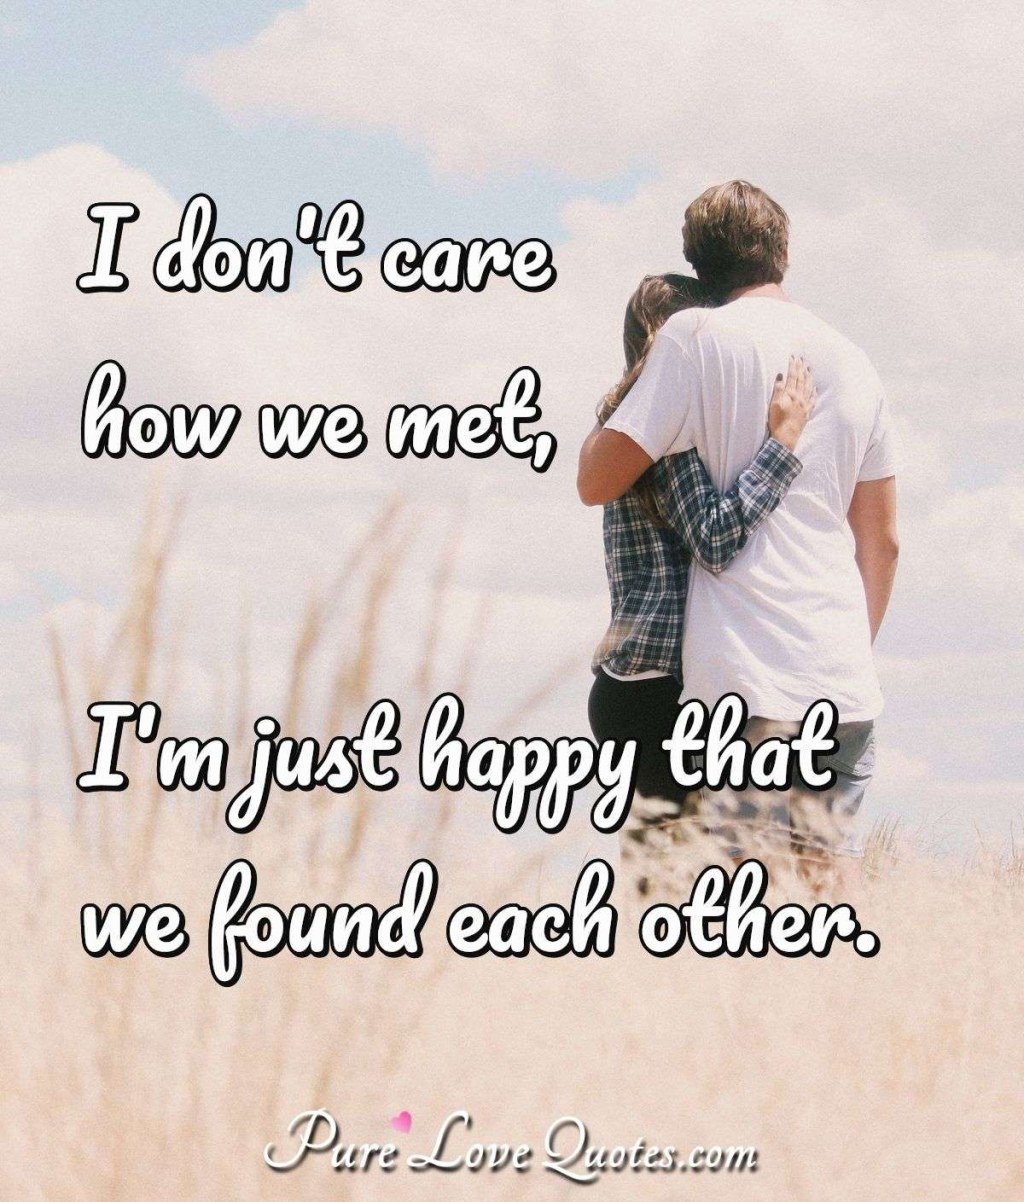 Picture of: I don’t care how we met, I’m just happy that we found each other